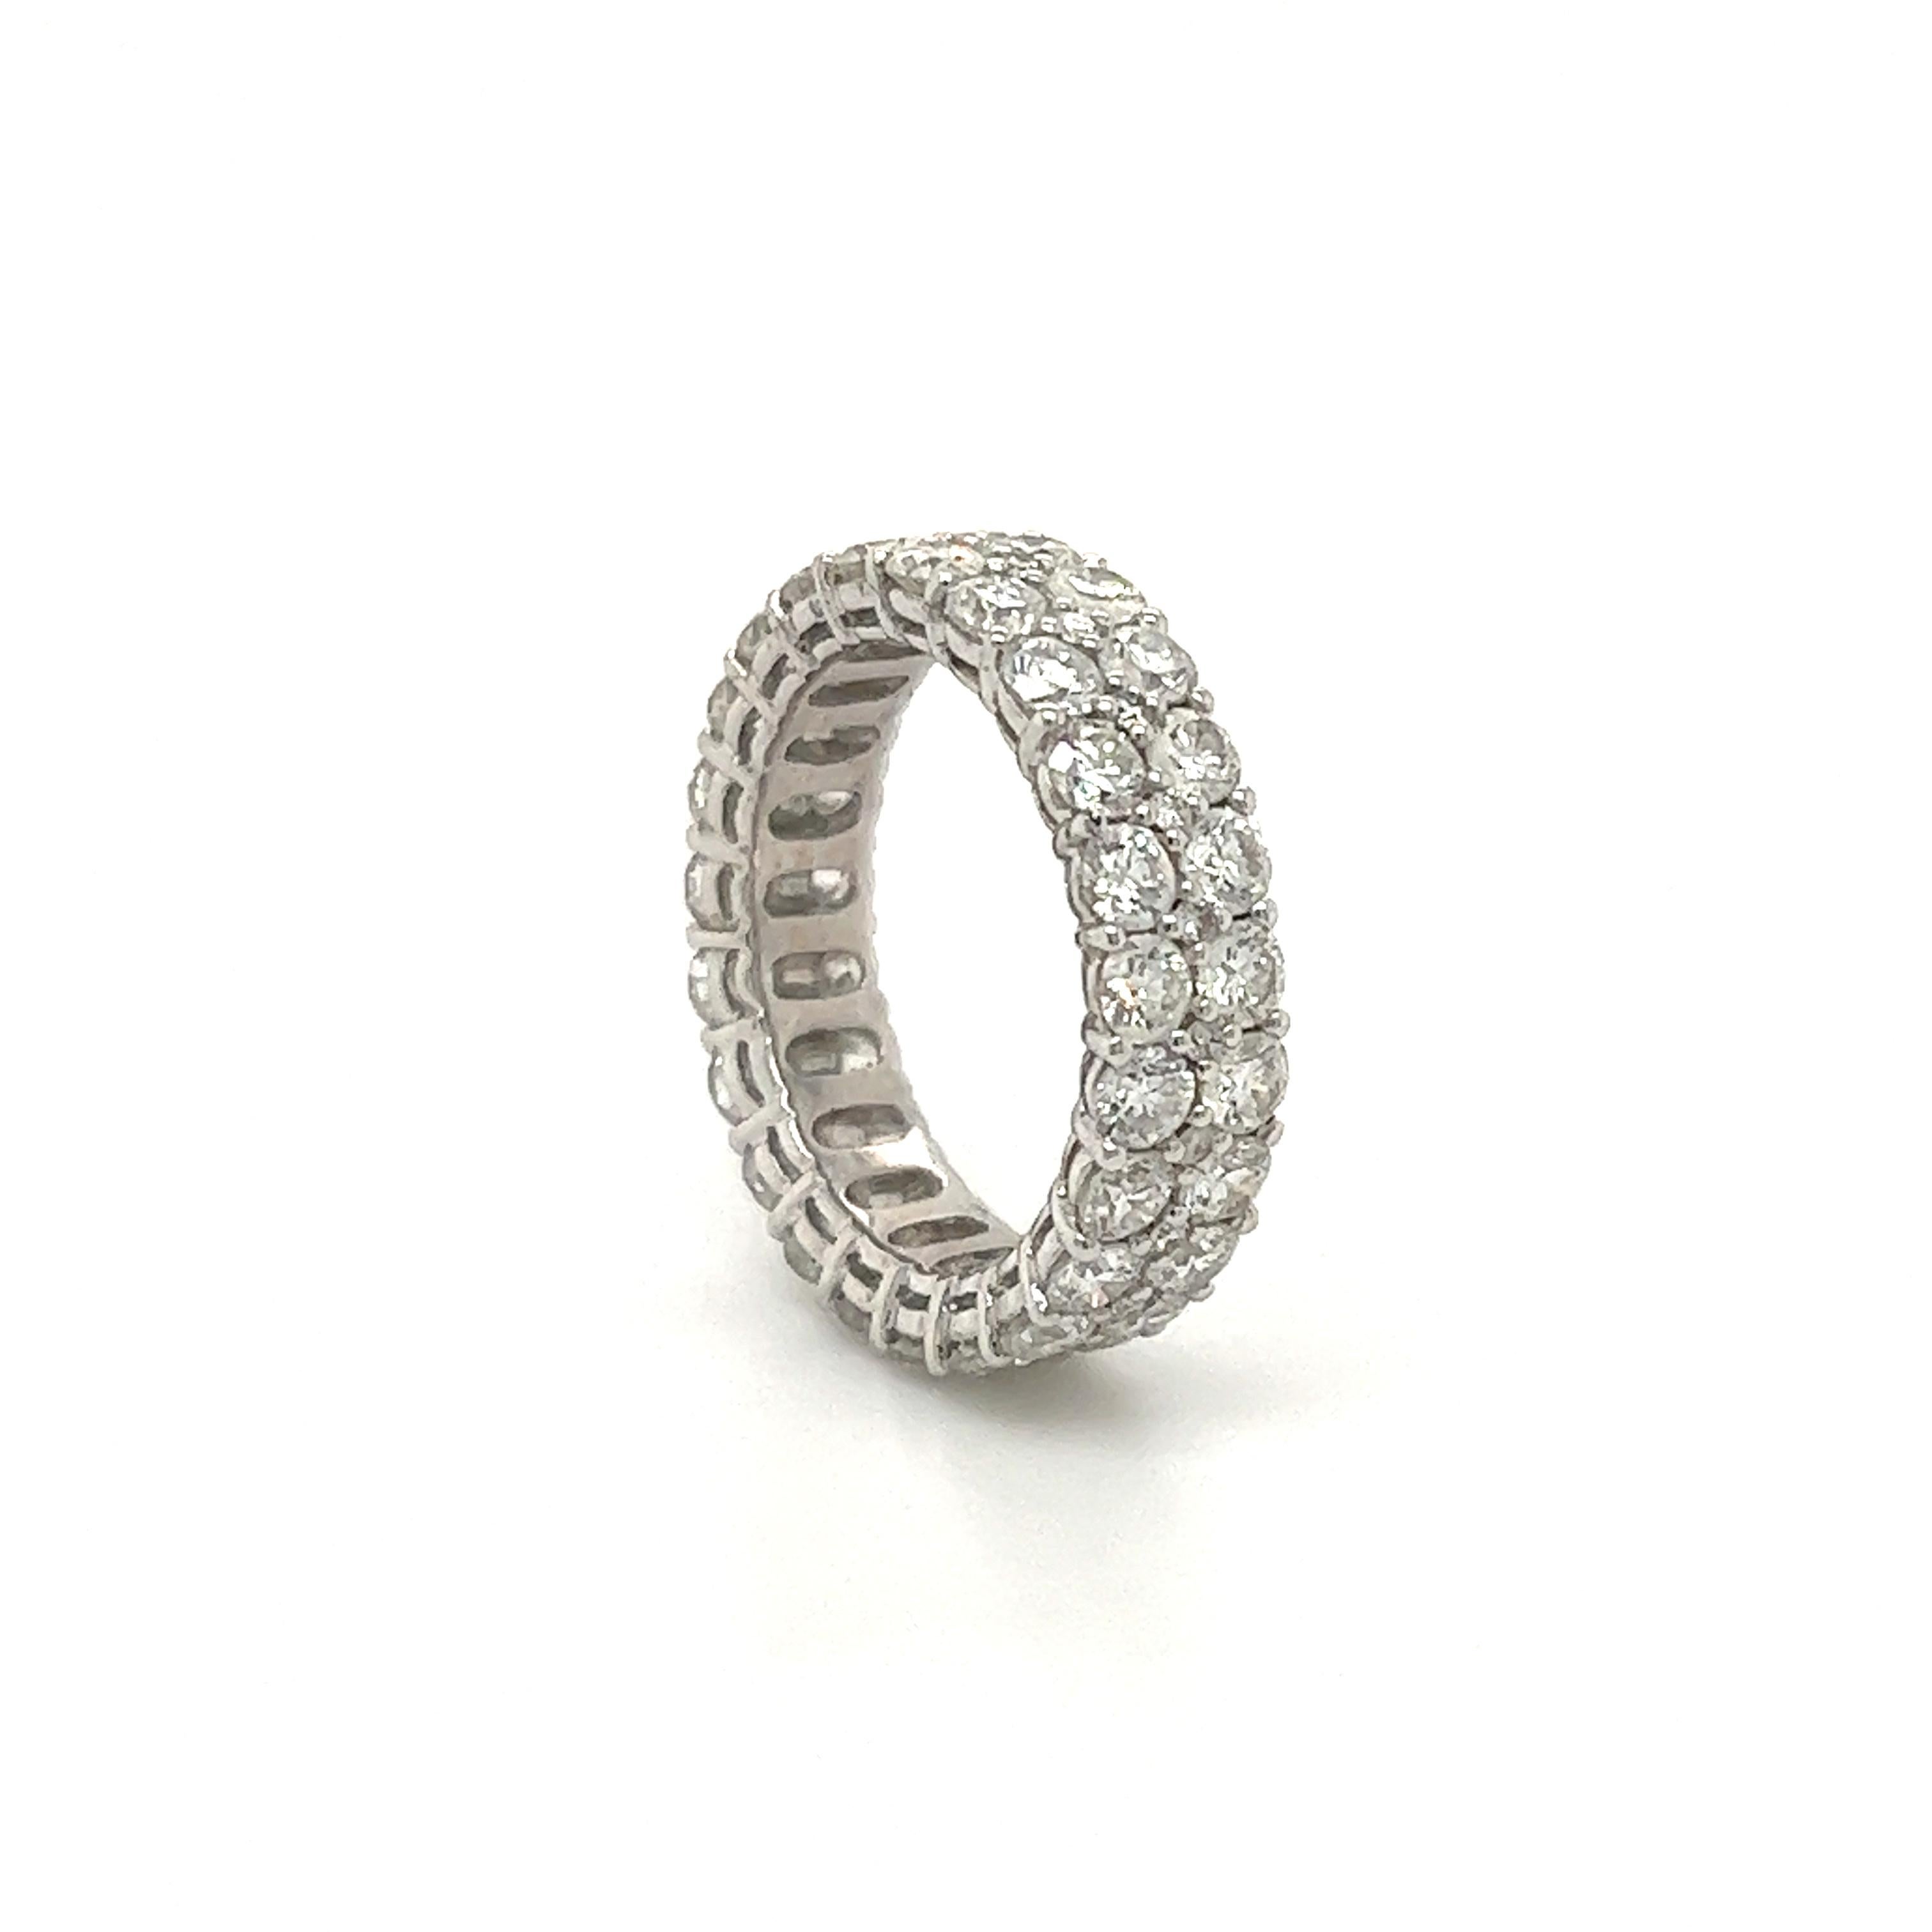 Fantastic design seen on this modern diamond eternity band. The ring is crafted in 18k white gold and showcases two rows of round brilliant cut diamonds, approximately 4.50 carat. The diamonds all show G-H color and VS clarity. The ring shows small